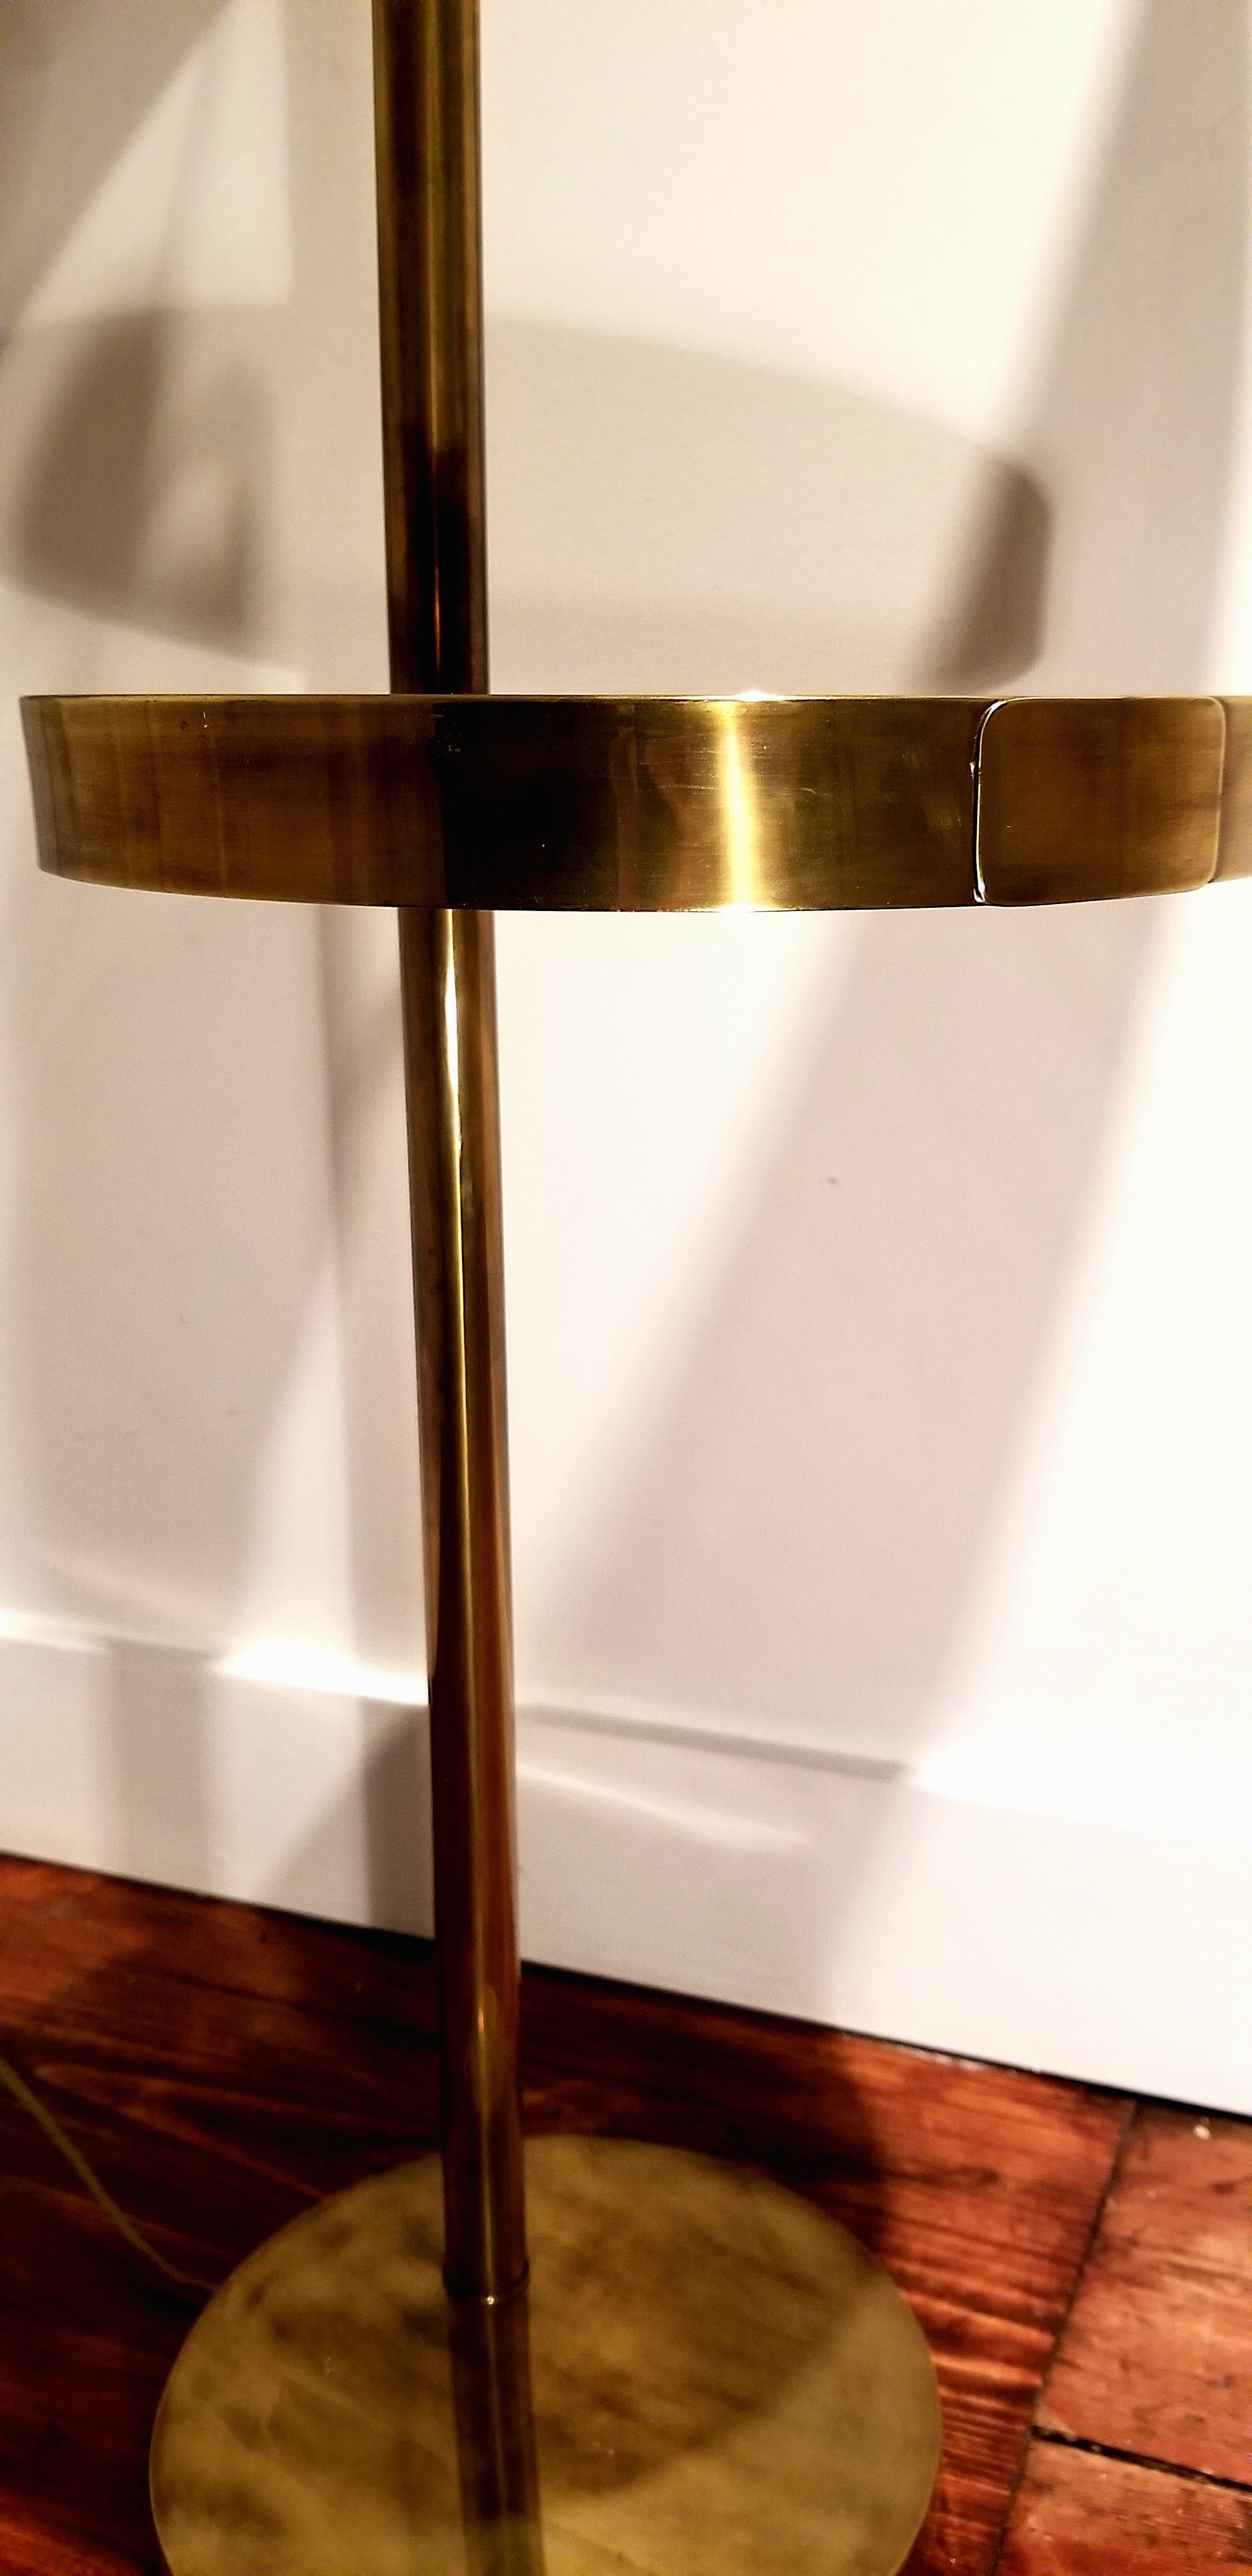 Heavy bronze floor lamp by Hart Associates. Best of quality, heavy solid construction. Dimmer switch with matching bronze knob and finial. Solid bronze construction with black laminate surface for the cocktail table.
Base measures 11in. x